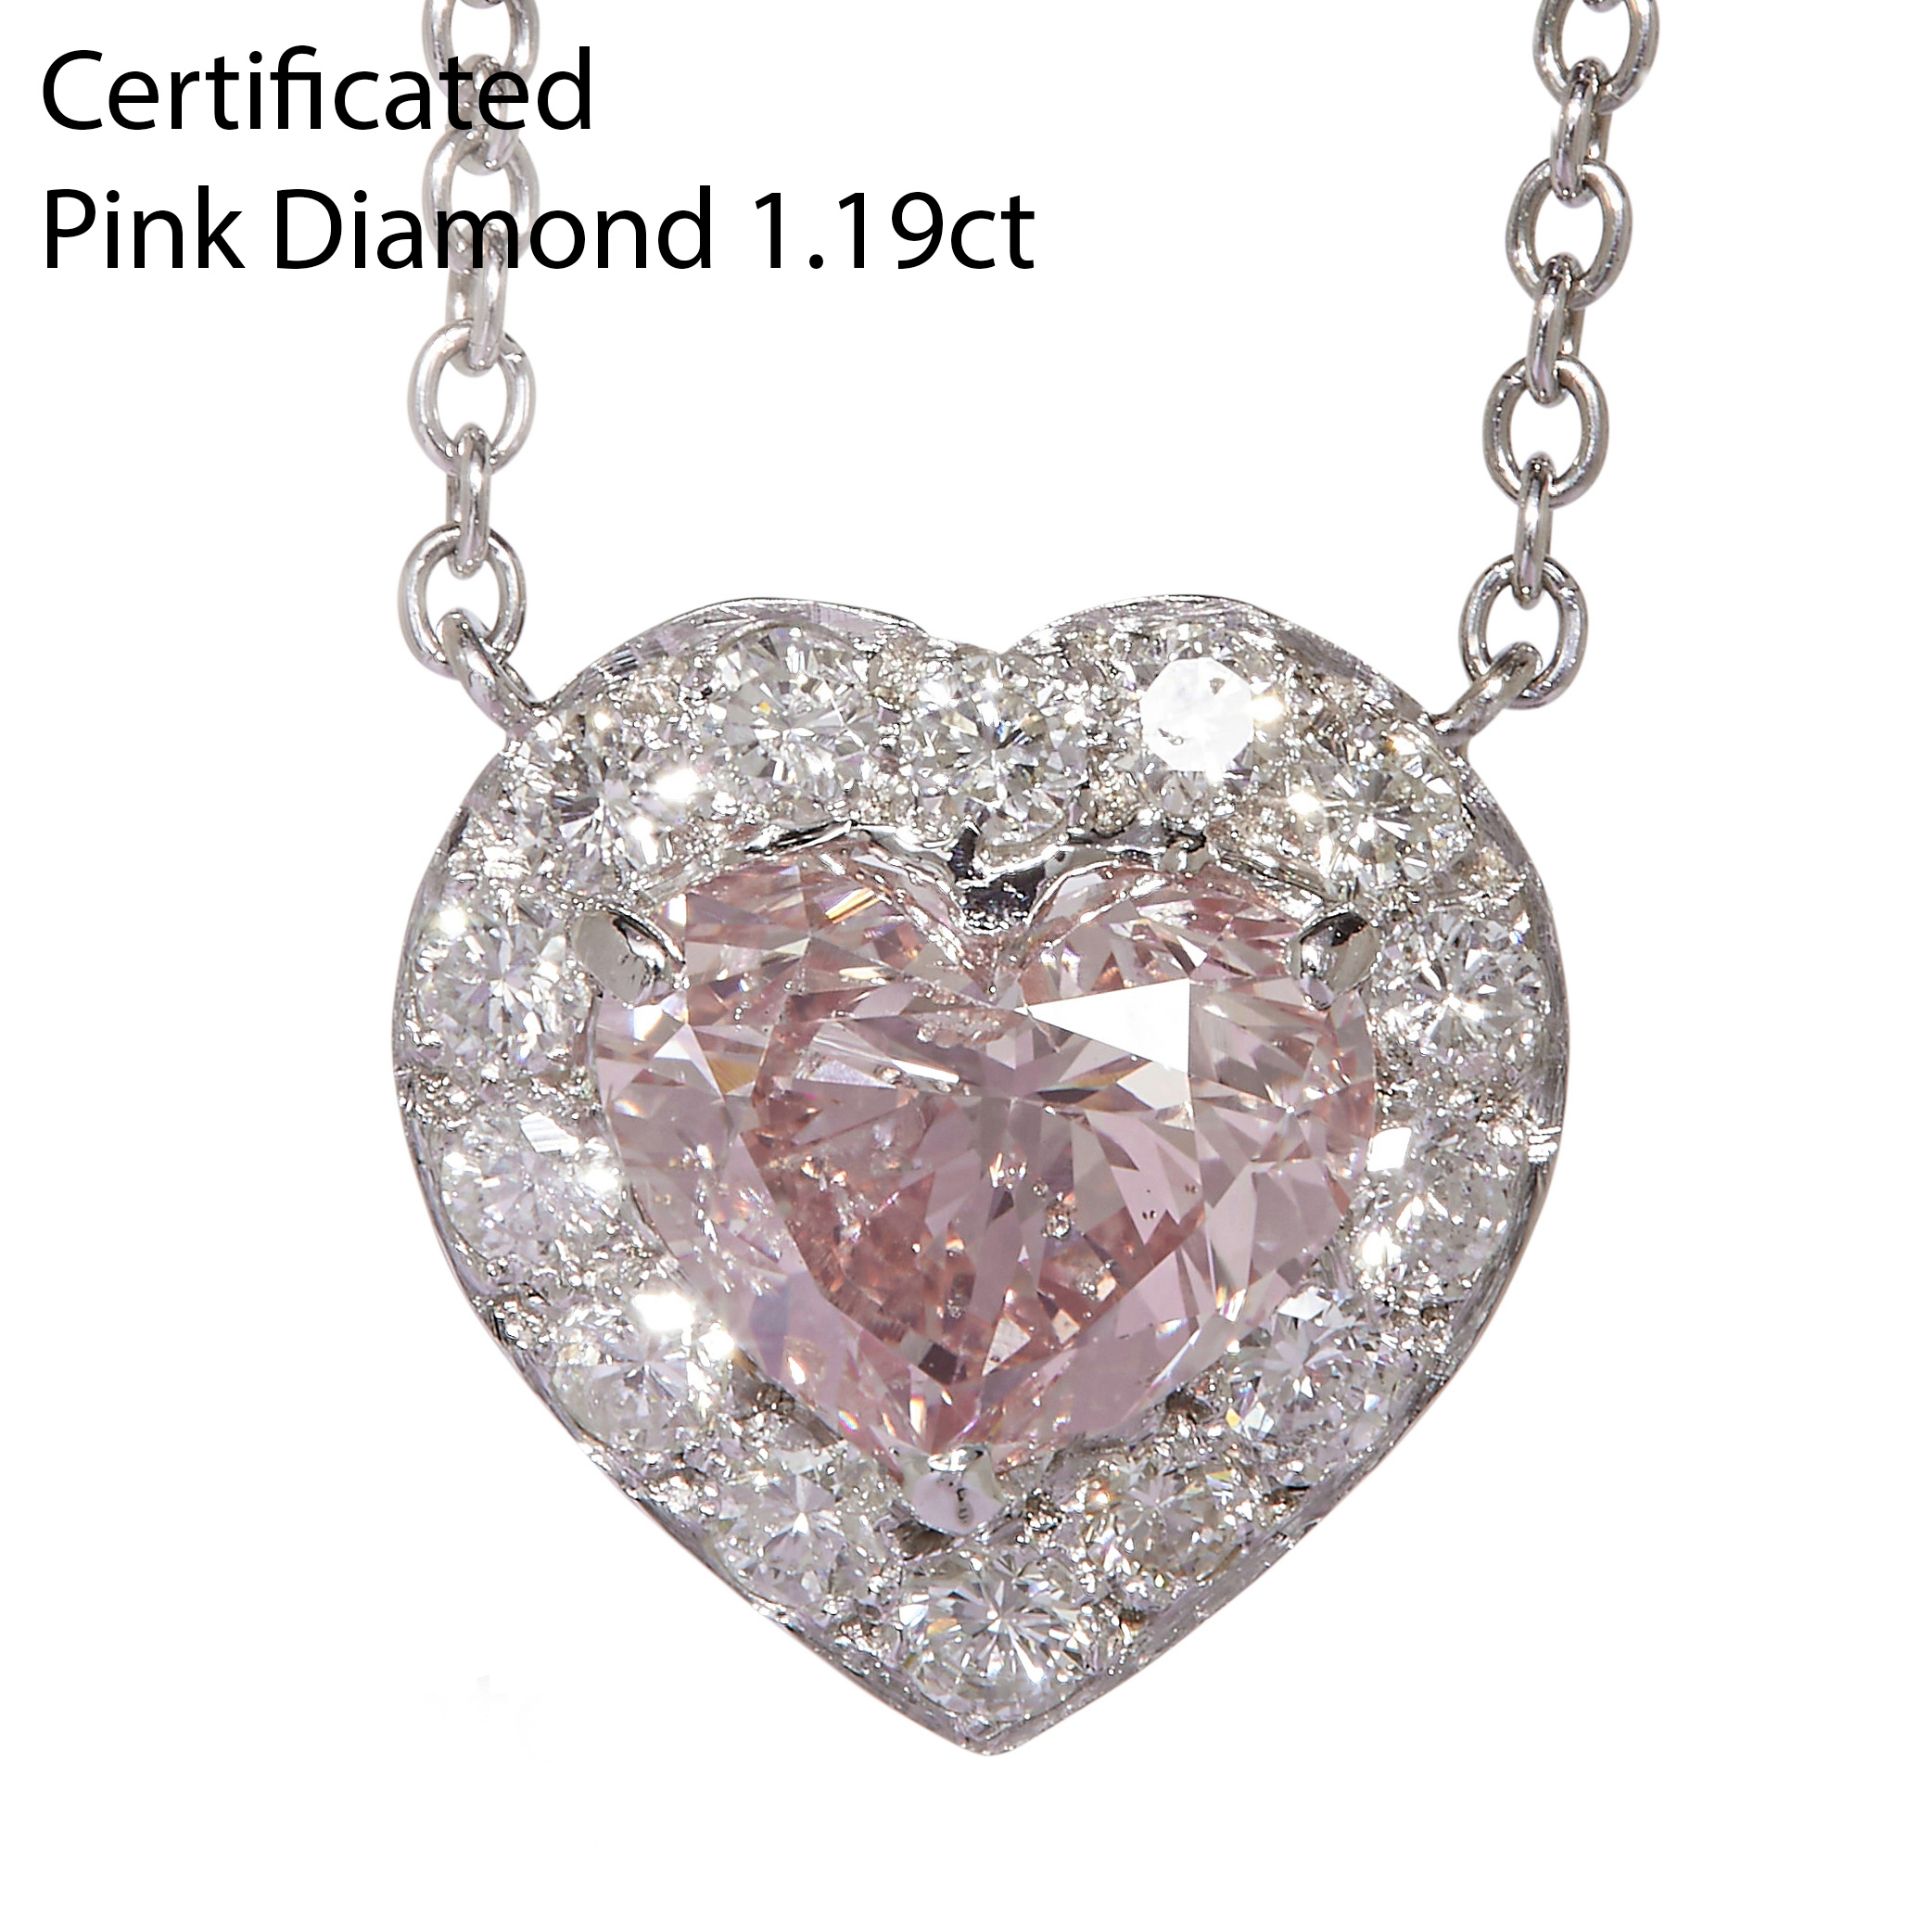 GIA CERTIFICATED PINK DIAMOND HEART PENDANT NECKLACE